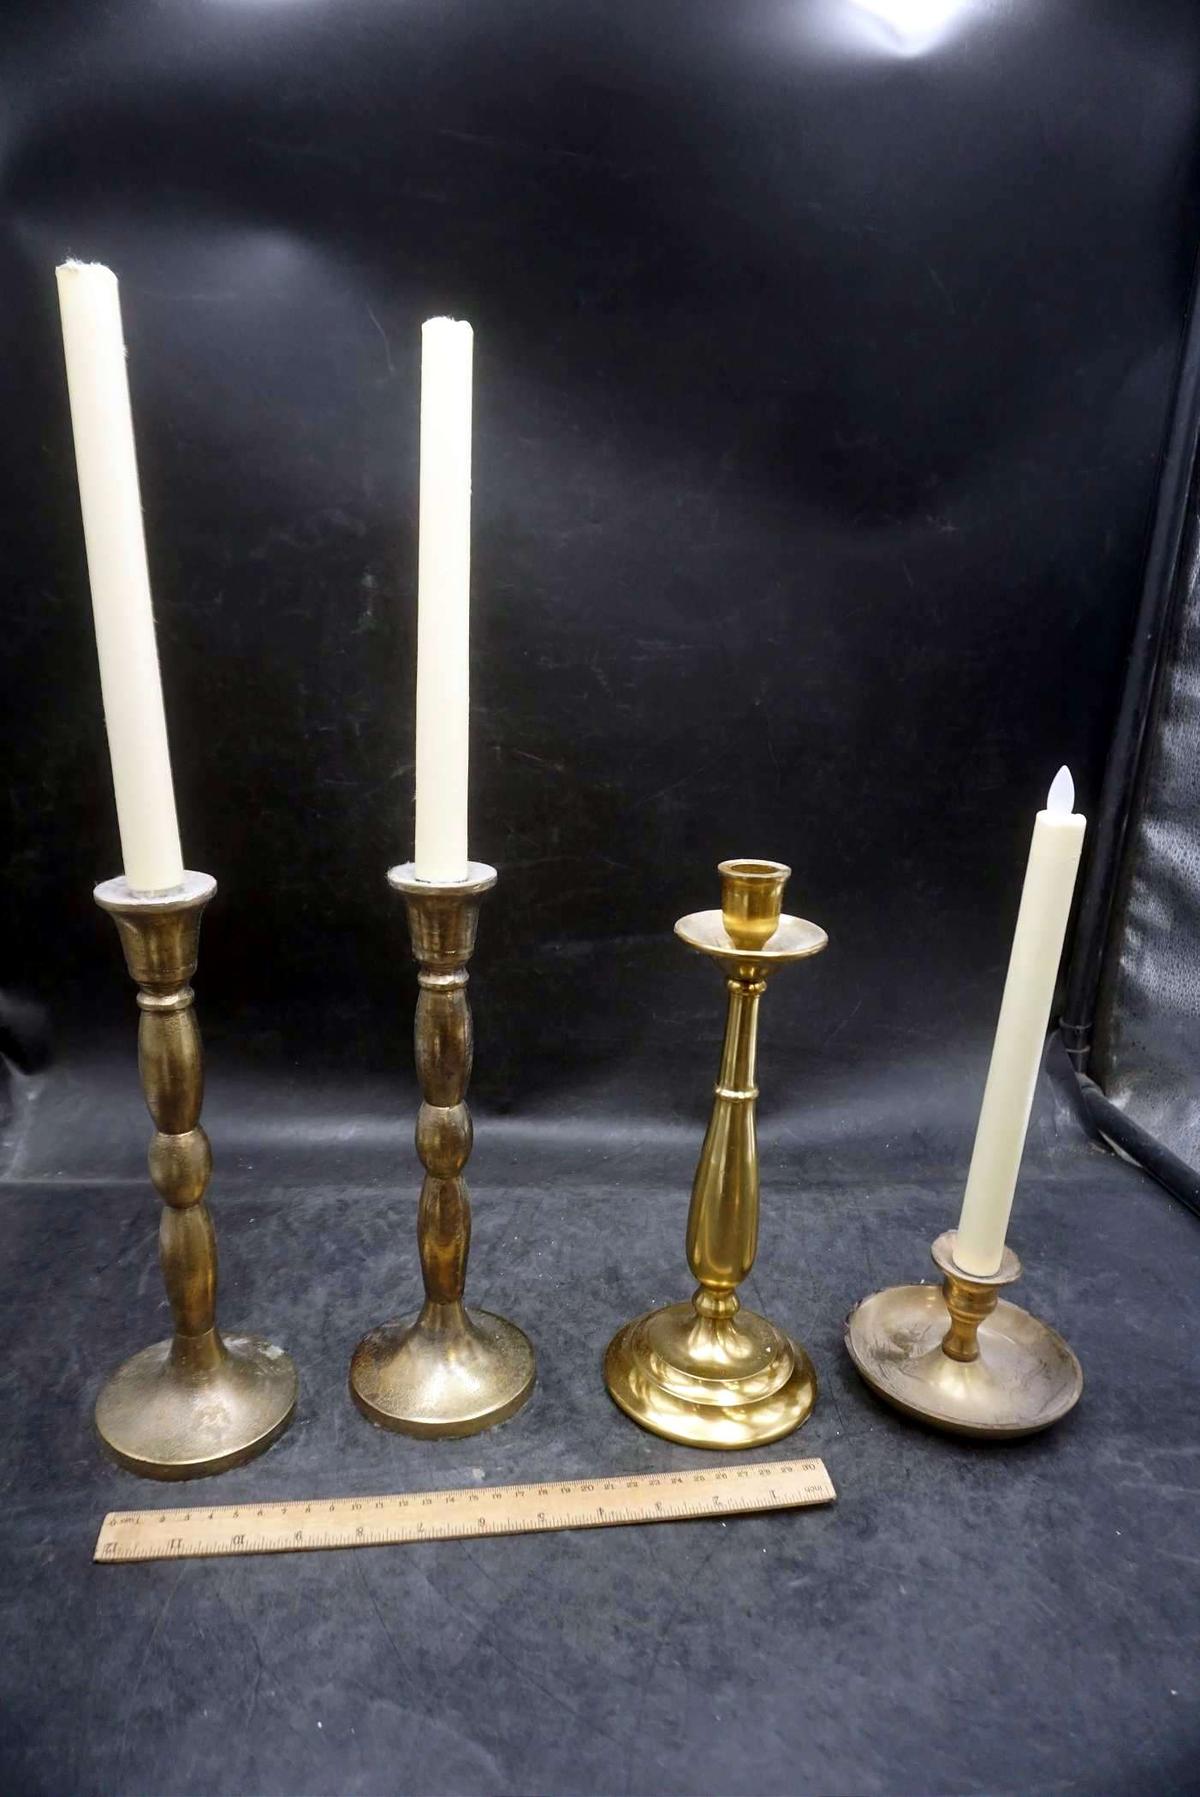 4 Candlestick Holders W/ 3 Candles